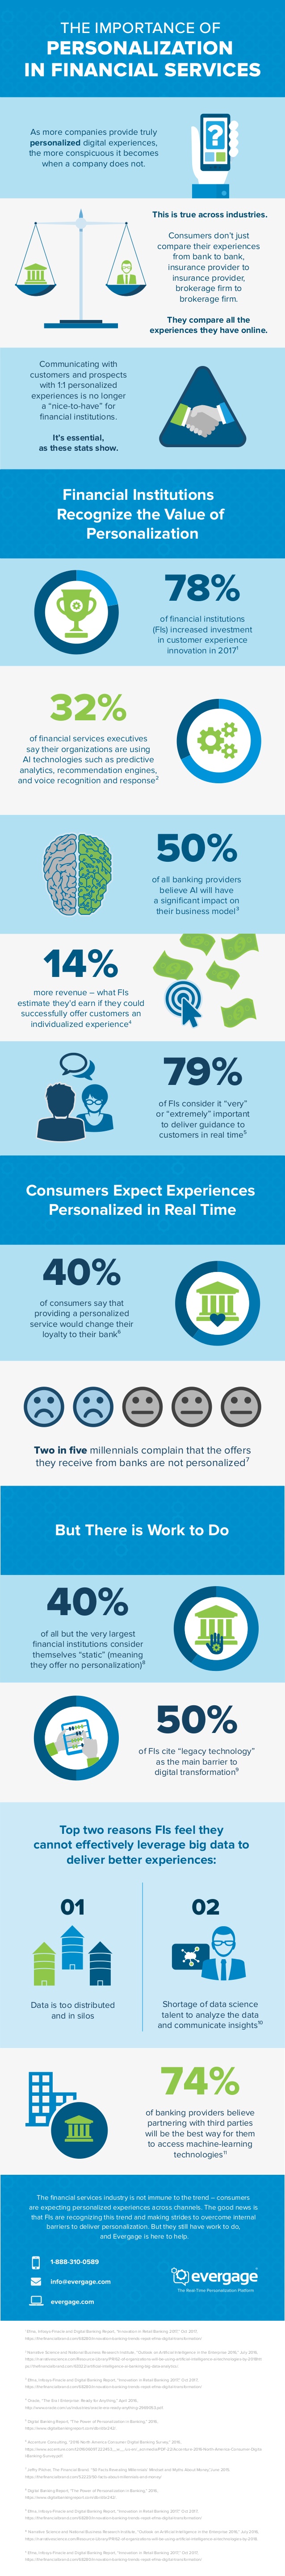 Personalization: The Game-Changer for Financial Services - Infographic